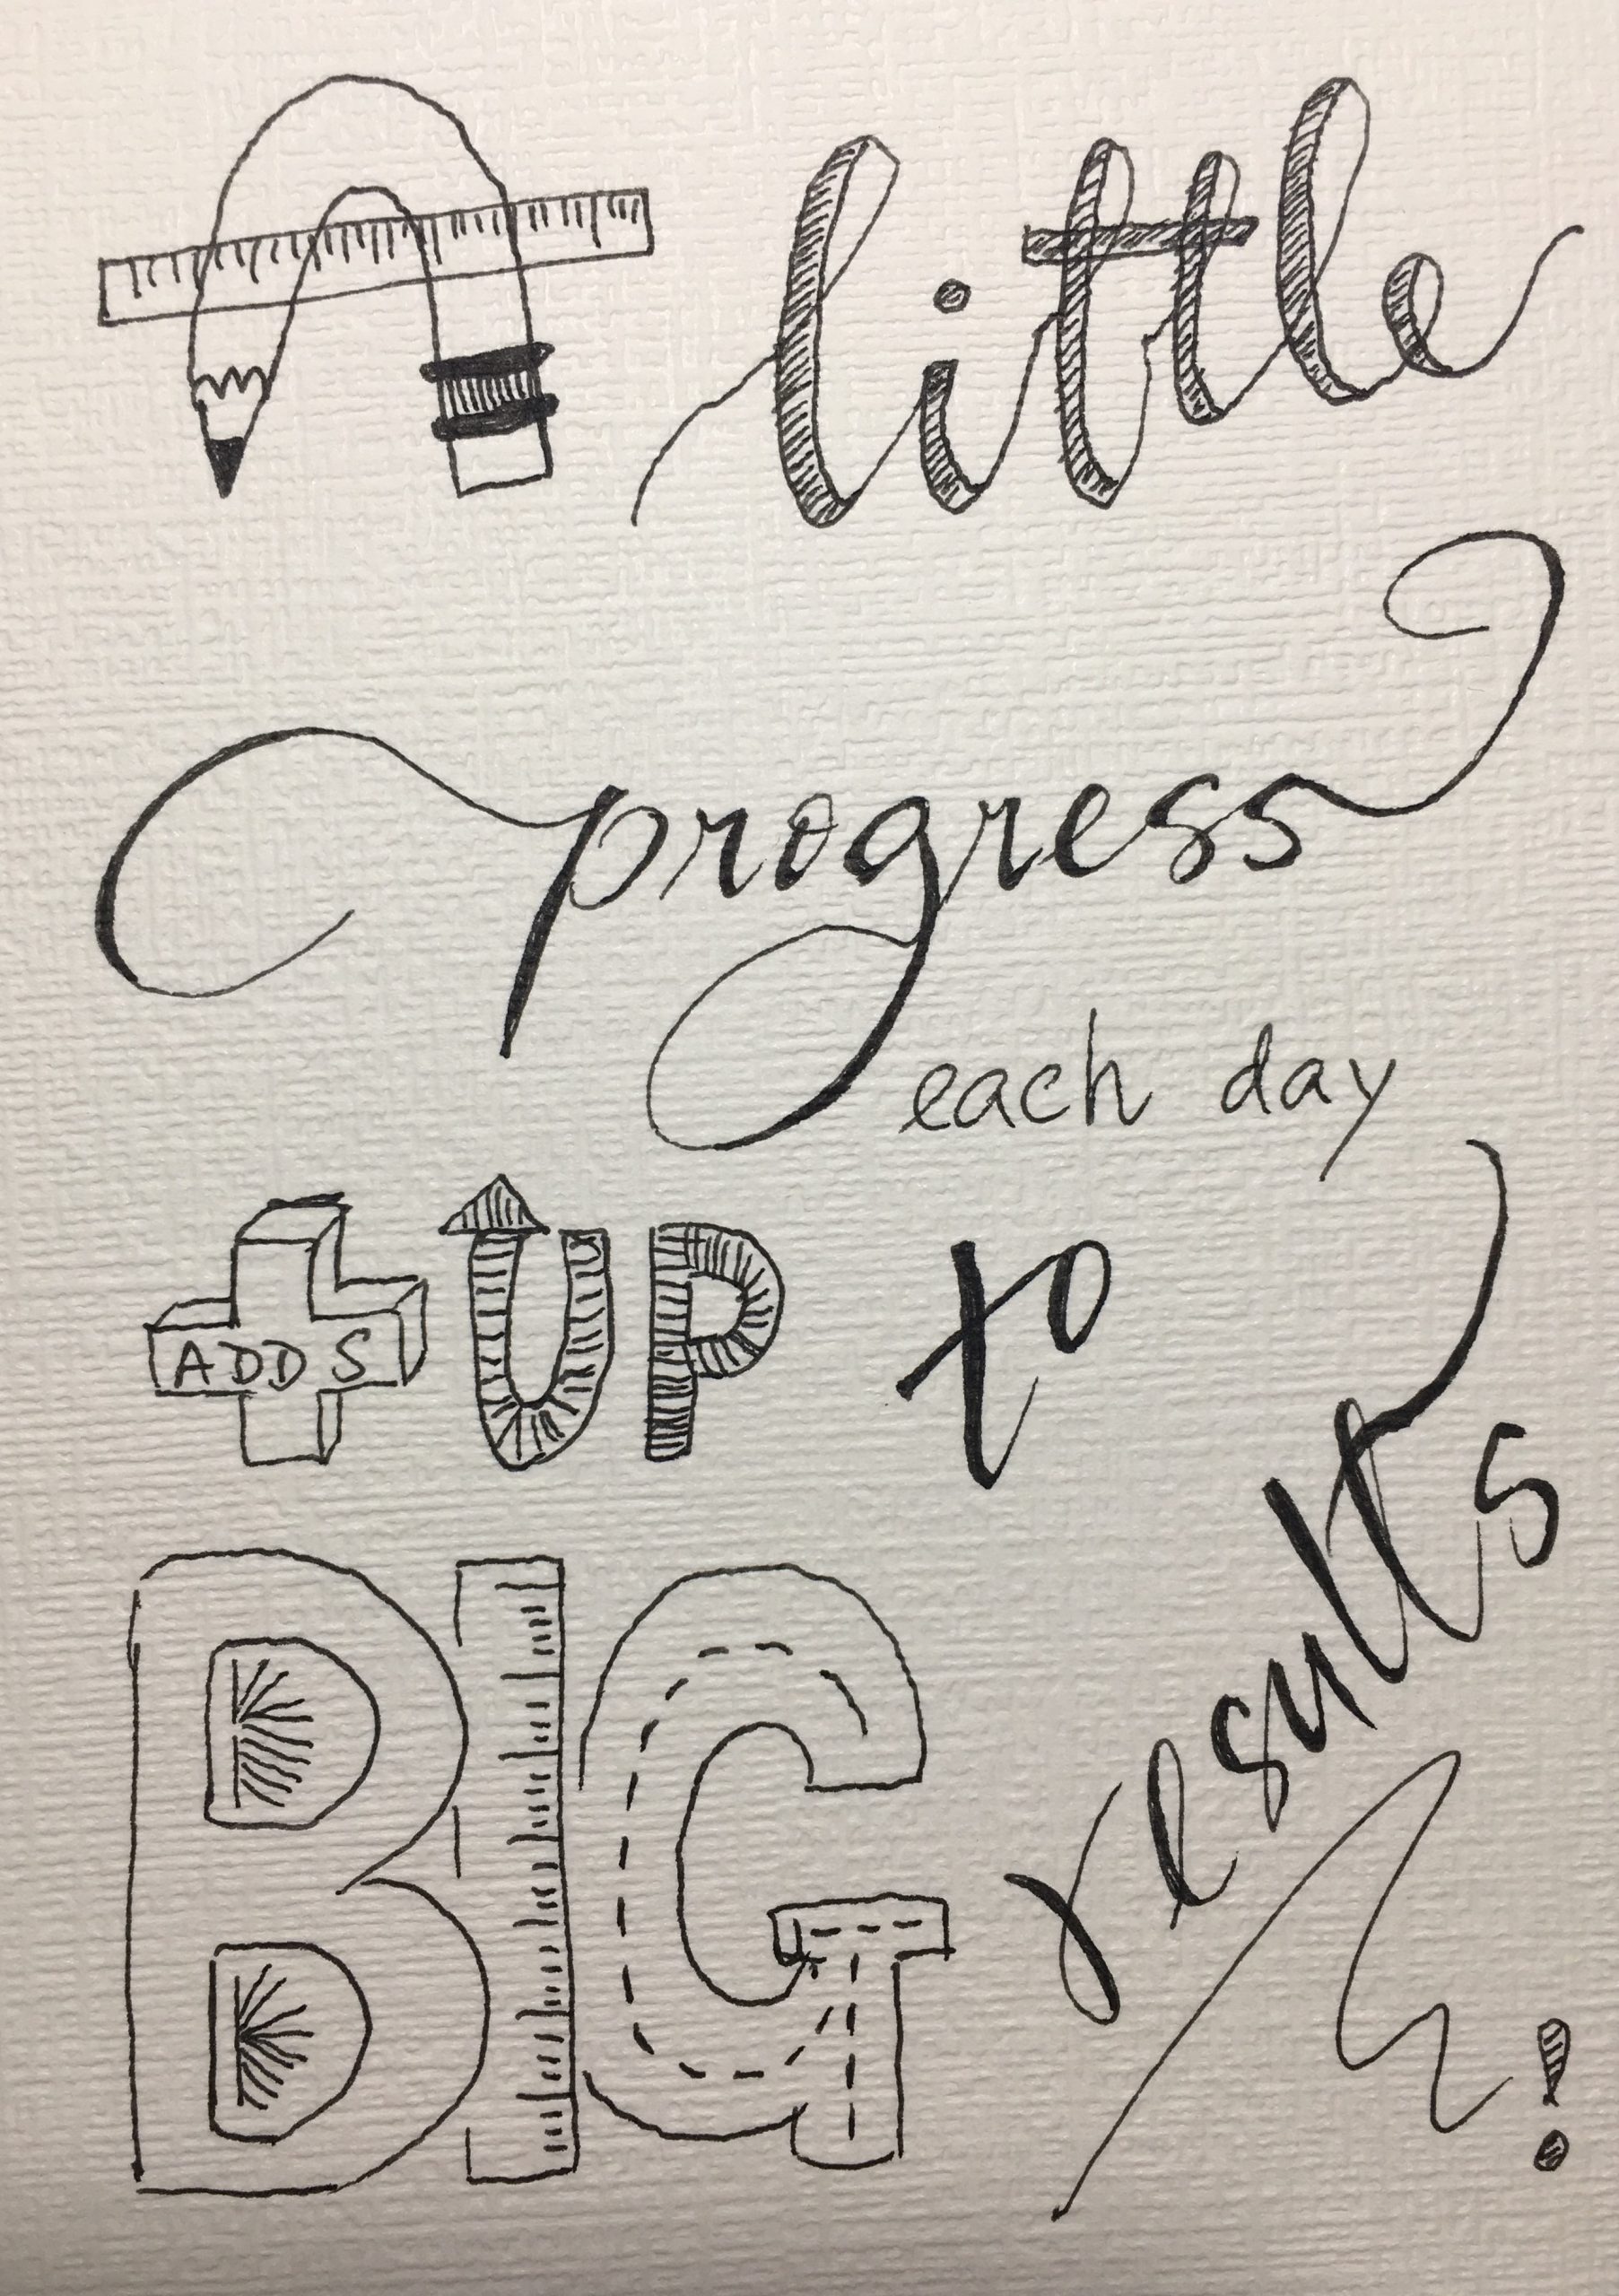 Little Progress Each Day Adds up to Big Results!